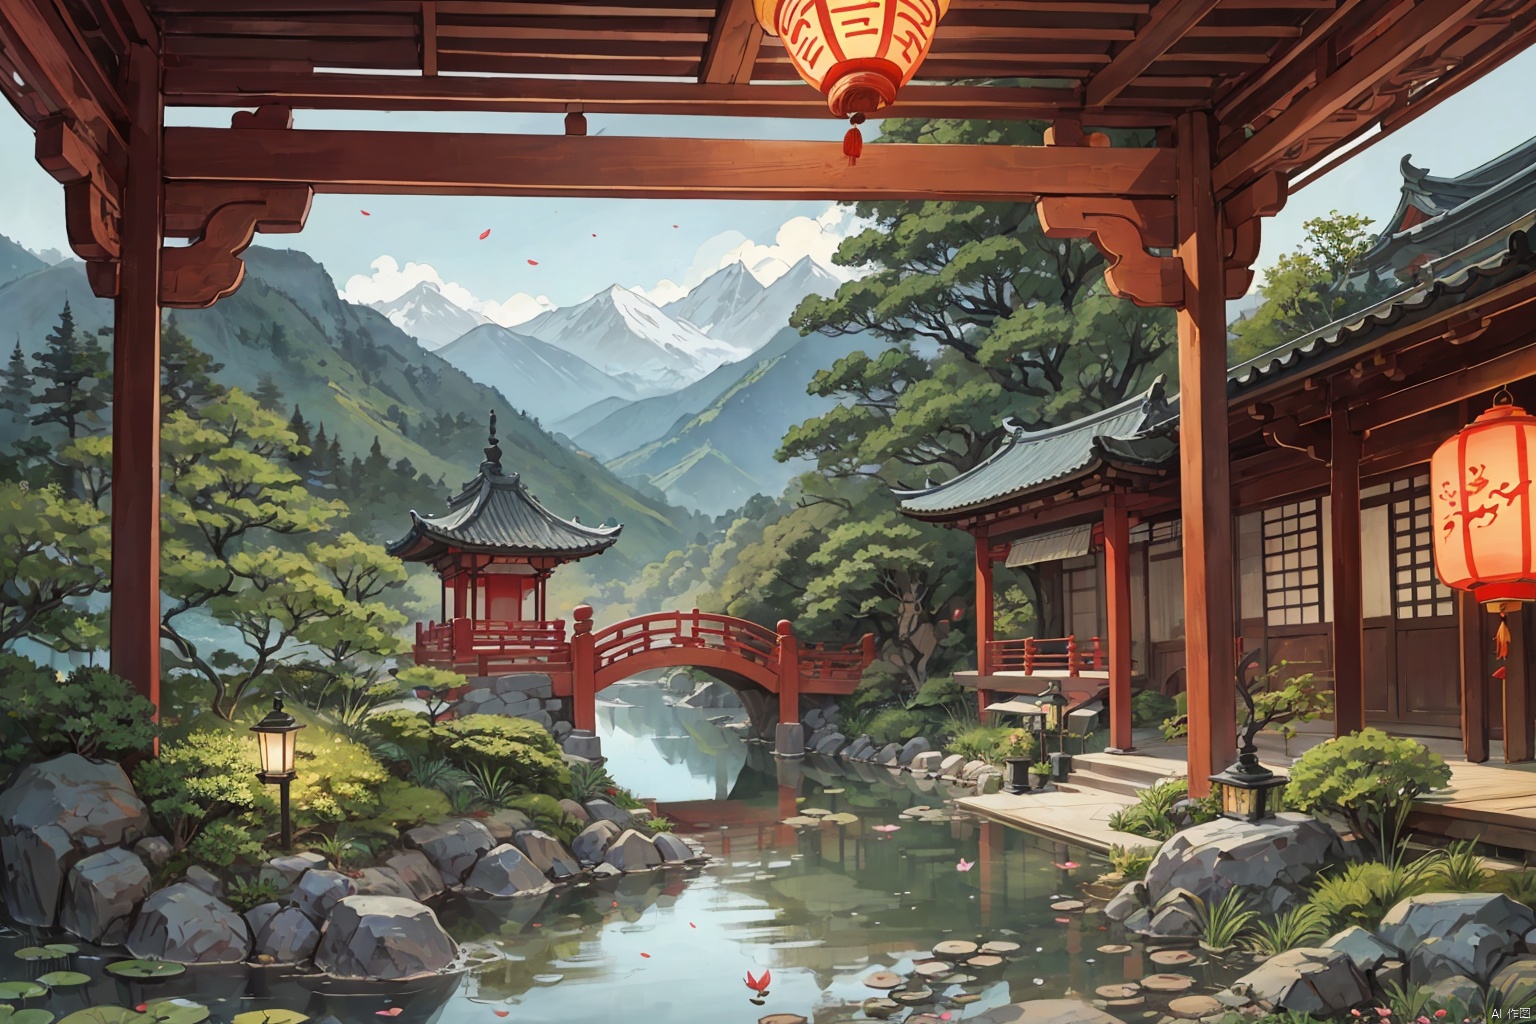 illustration, Chinese architecture, Chinese garden, pavilions, towers, traditional buildings, bridges, water features:0.95, greenery, mountains, peaceful atmosphere:1.3, wooden structures, rocks and stones, waterfalls, natural color scheme, traditional clothing, plum blossom, lotus, bamboo, dragon, phoenix, peacock, lanterns, traditional art styles, calligraphy, ink painting, courtyards, moon gates, winding paths, rock gardens, koi ponds, red lanterns, cultural motifs, sculptures, traditional musical instruments, tea houses, bonsai trees, terraces, bamboo fences.